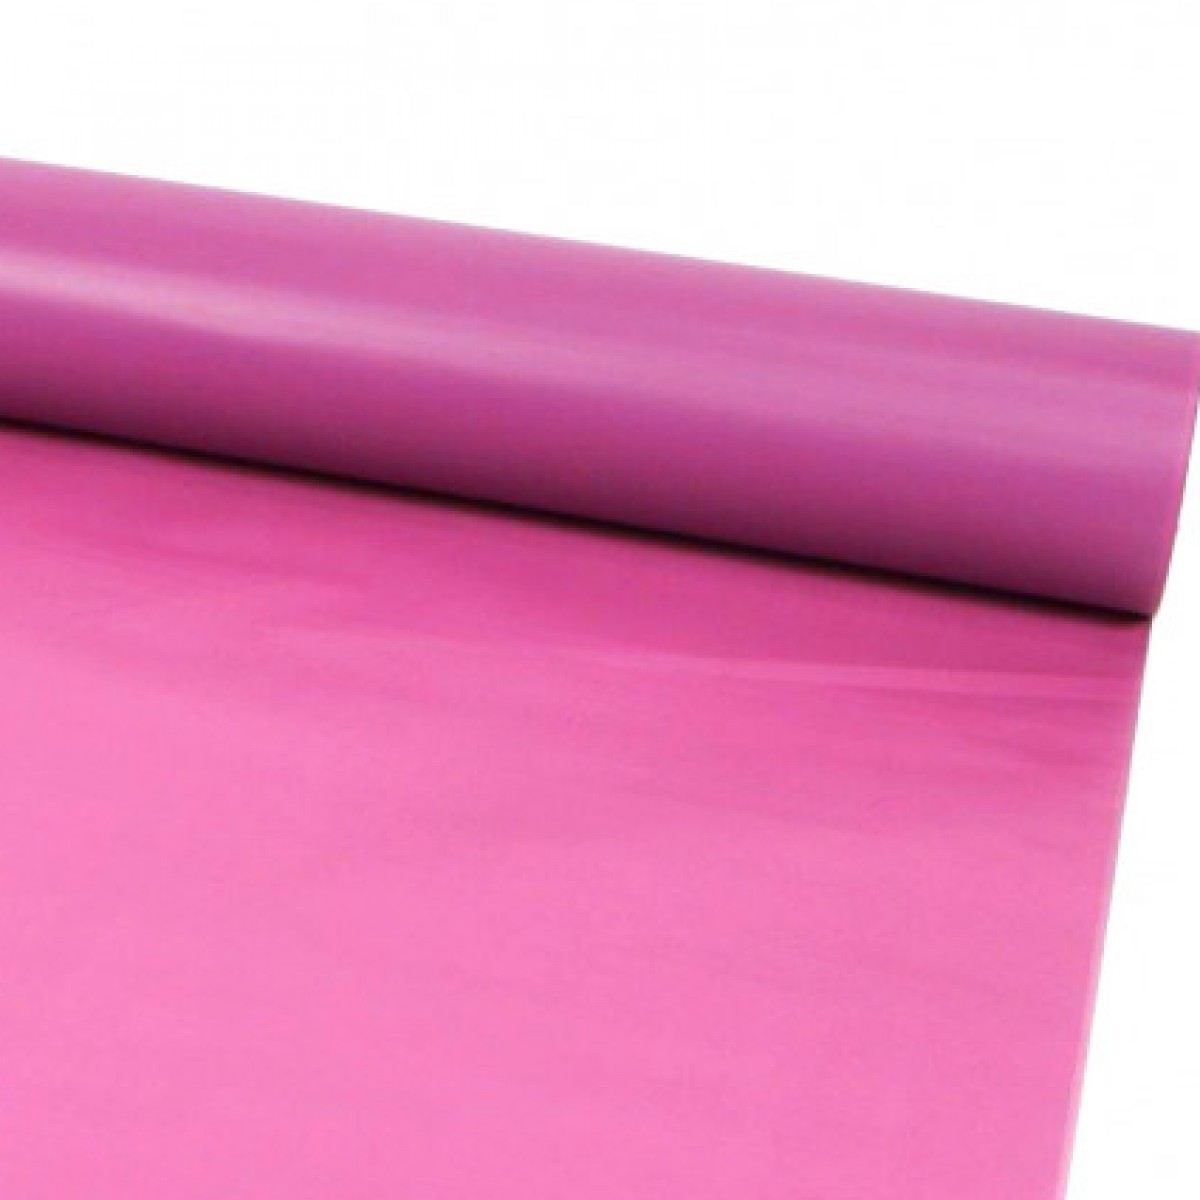 7049 Frosted Strong pink 80cmx25m 50mic Film - 1 Roll